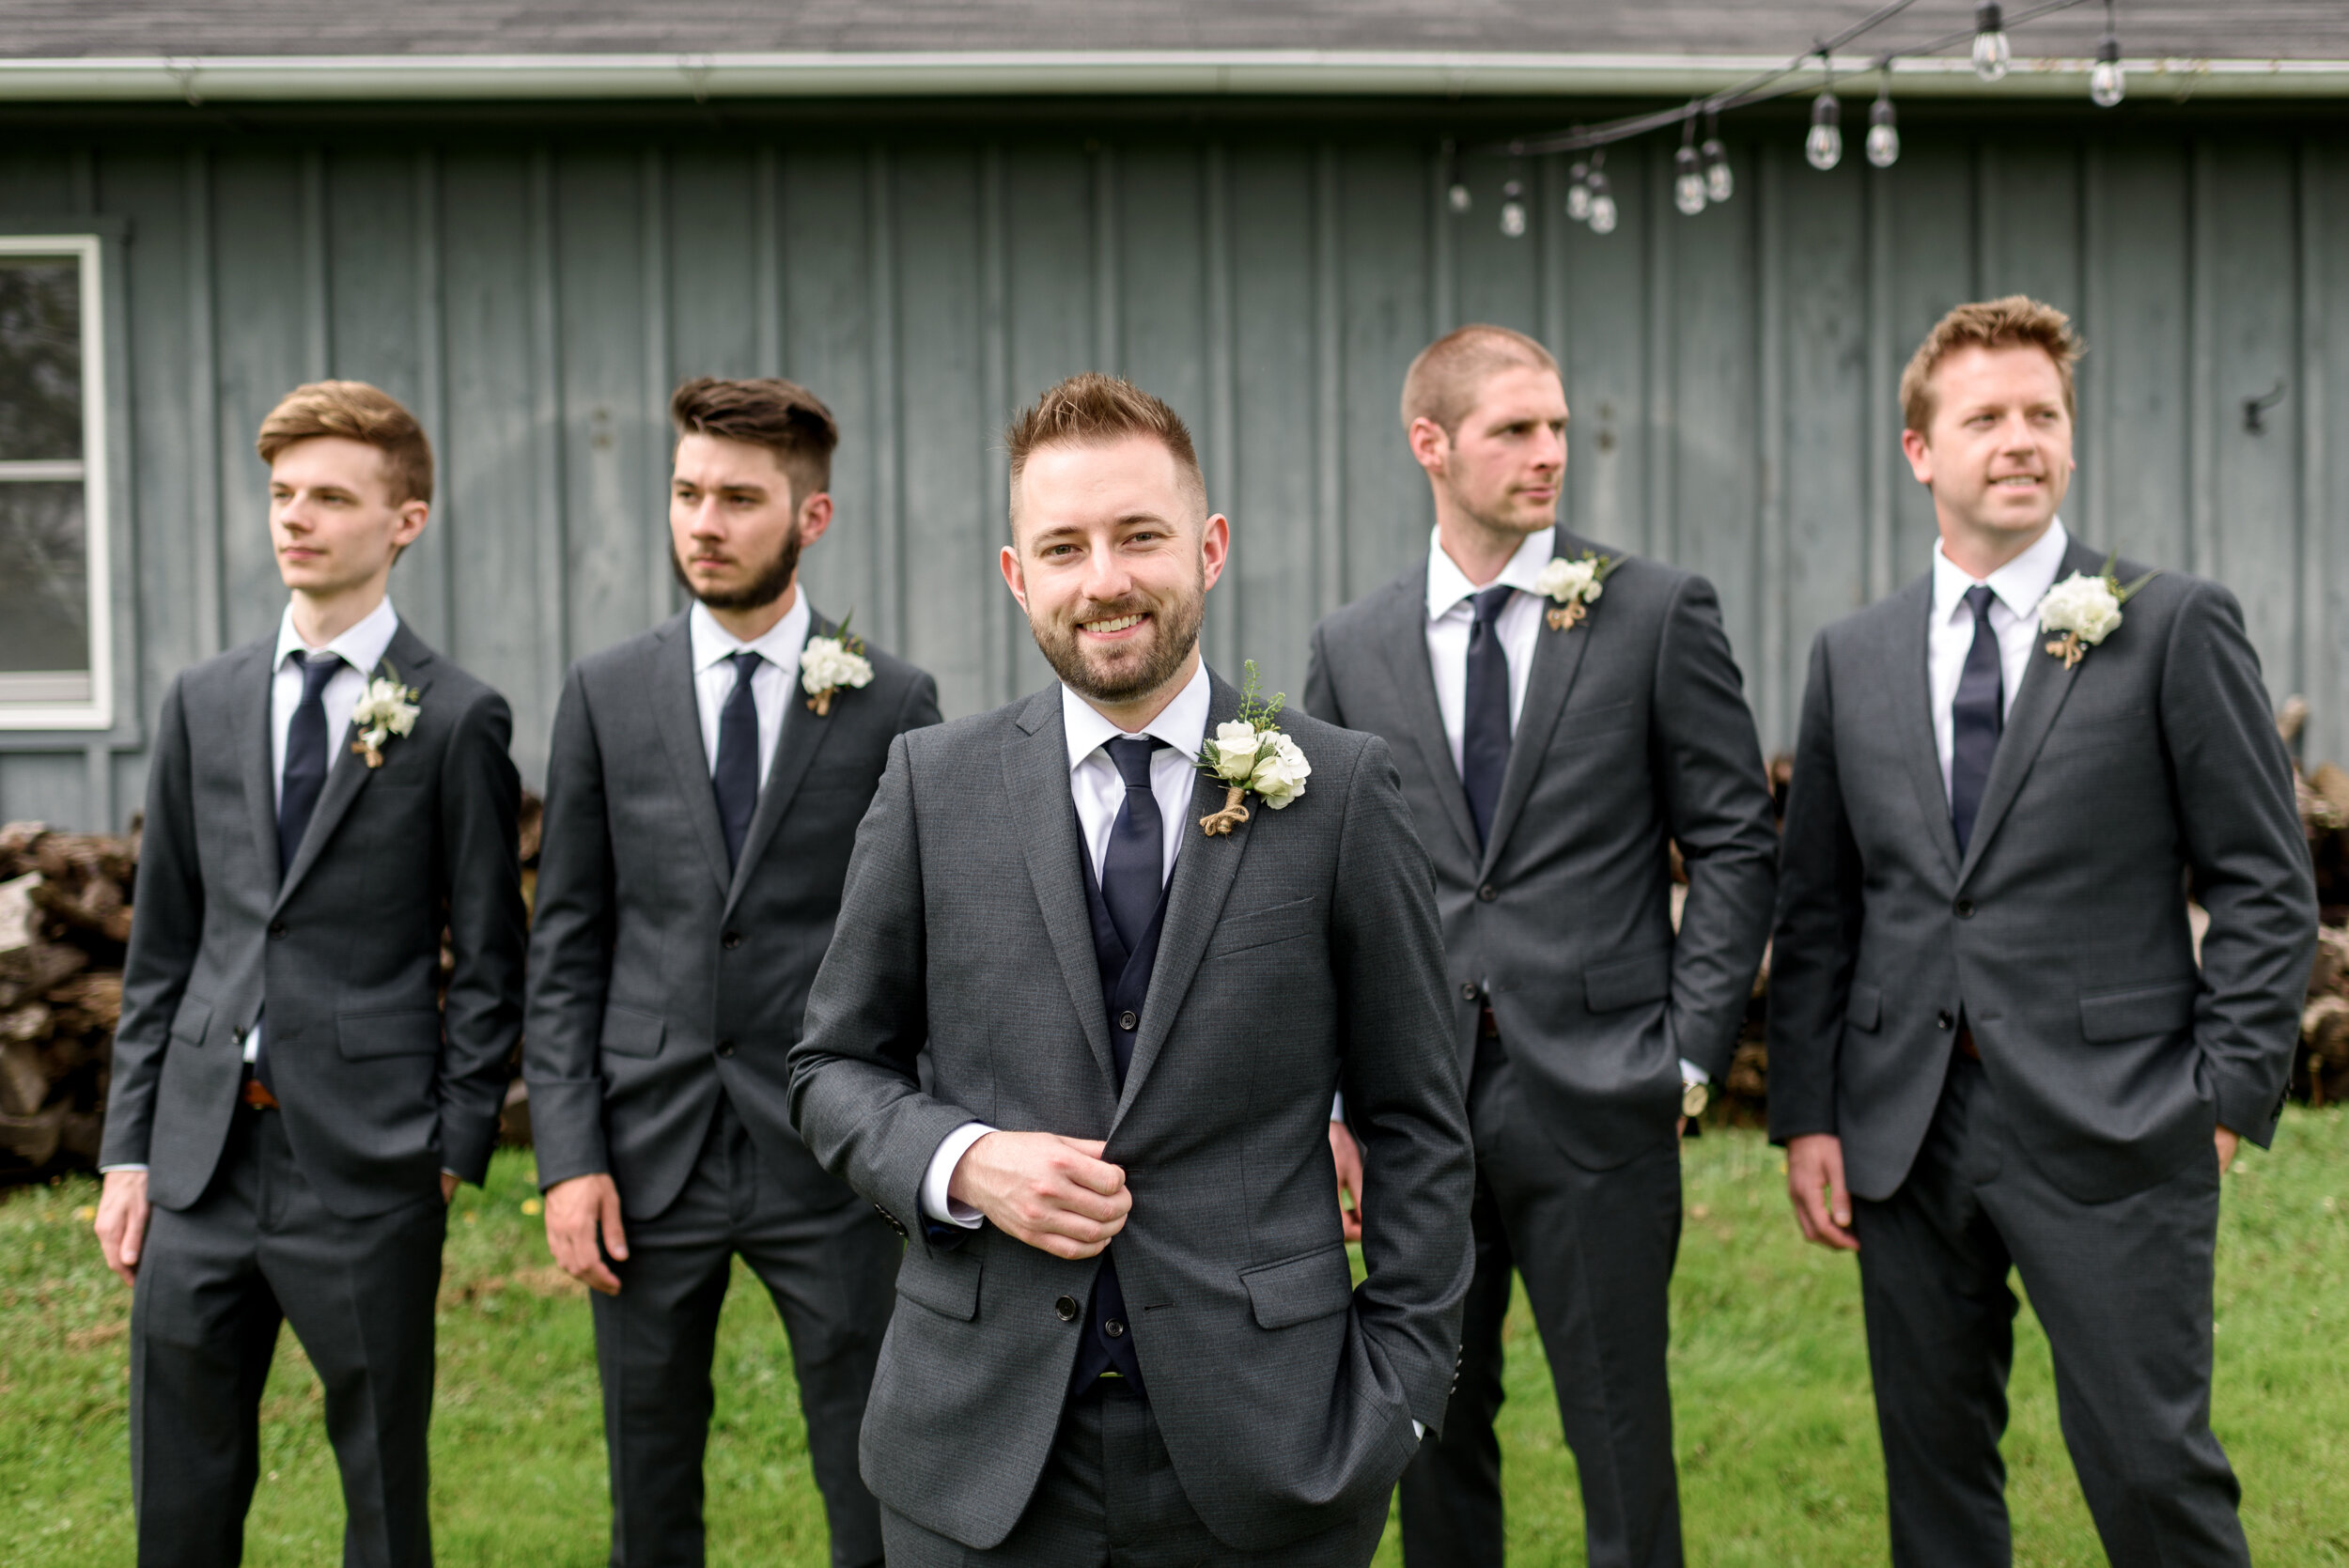 Chris and Taylor's Wedding at The Farm Bakery and Events